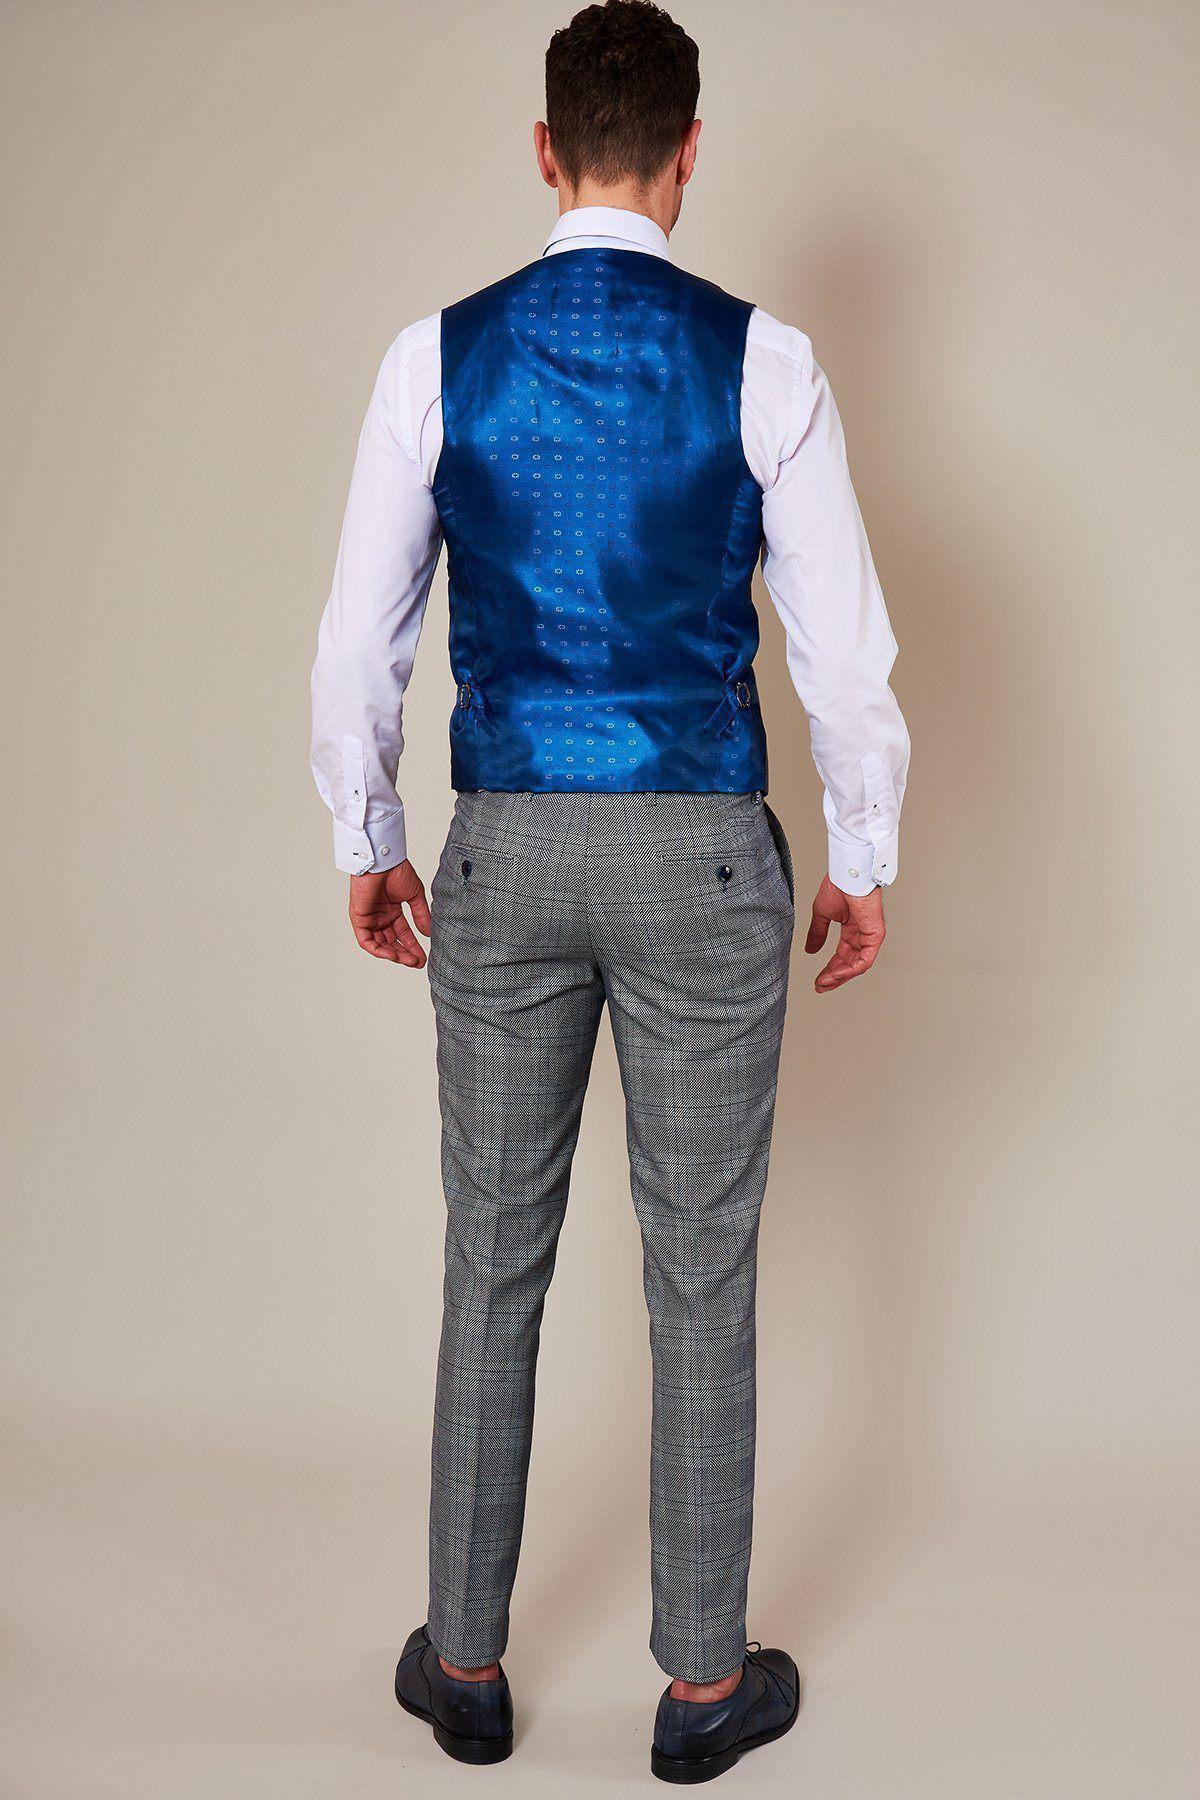 Marc Darcy Mens Formal Wear And Traditional Vintage Suits